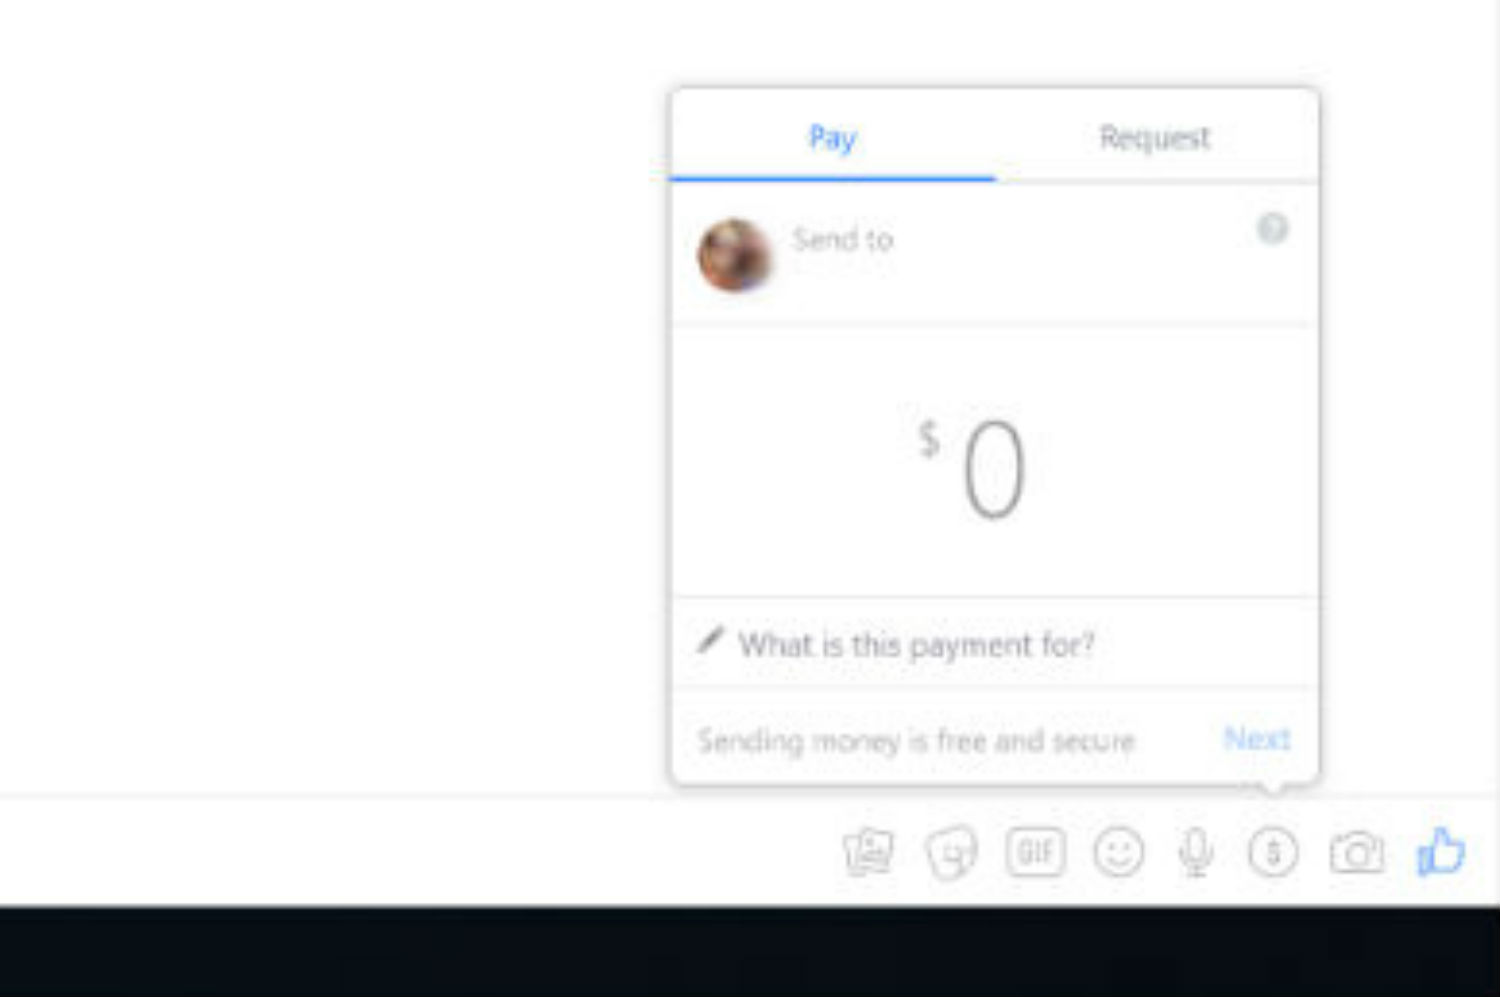 how to send money on facebook fbmoneycomp3